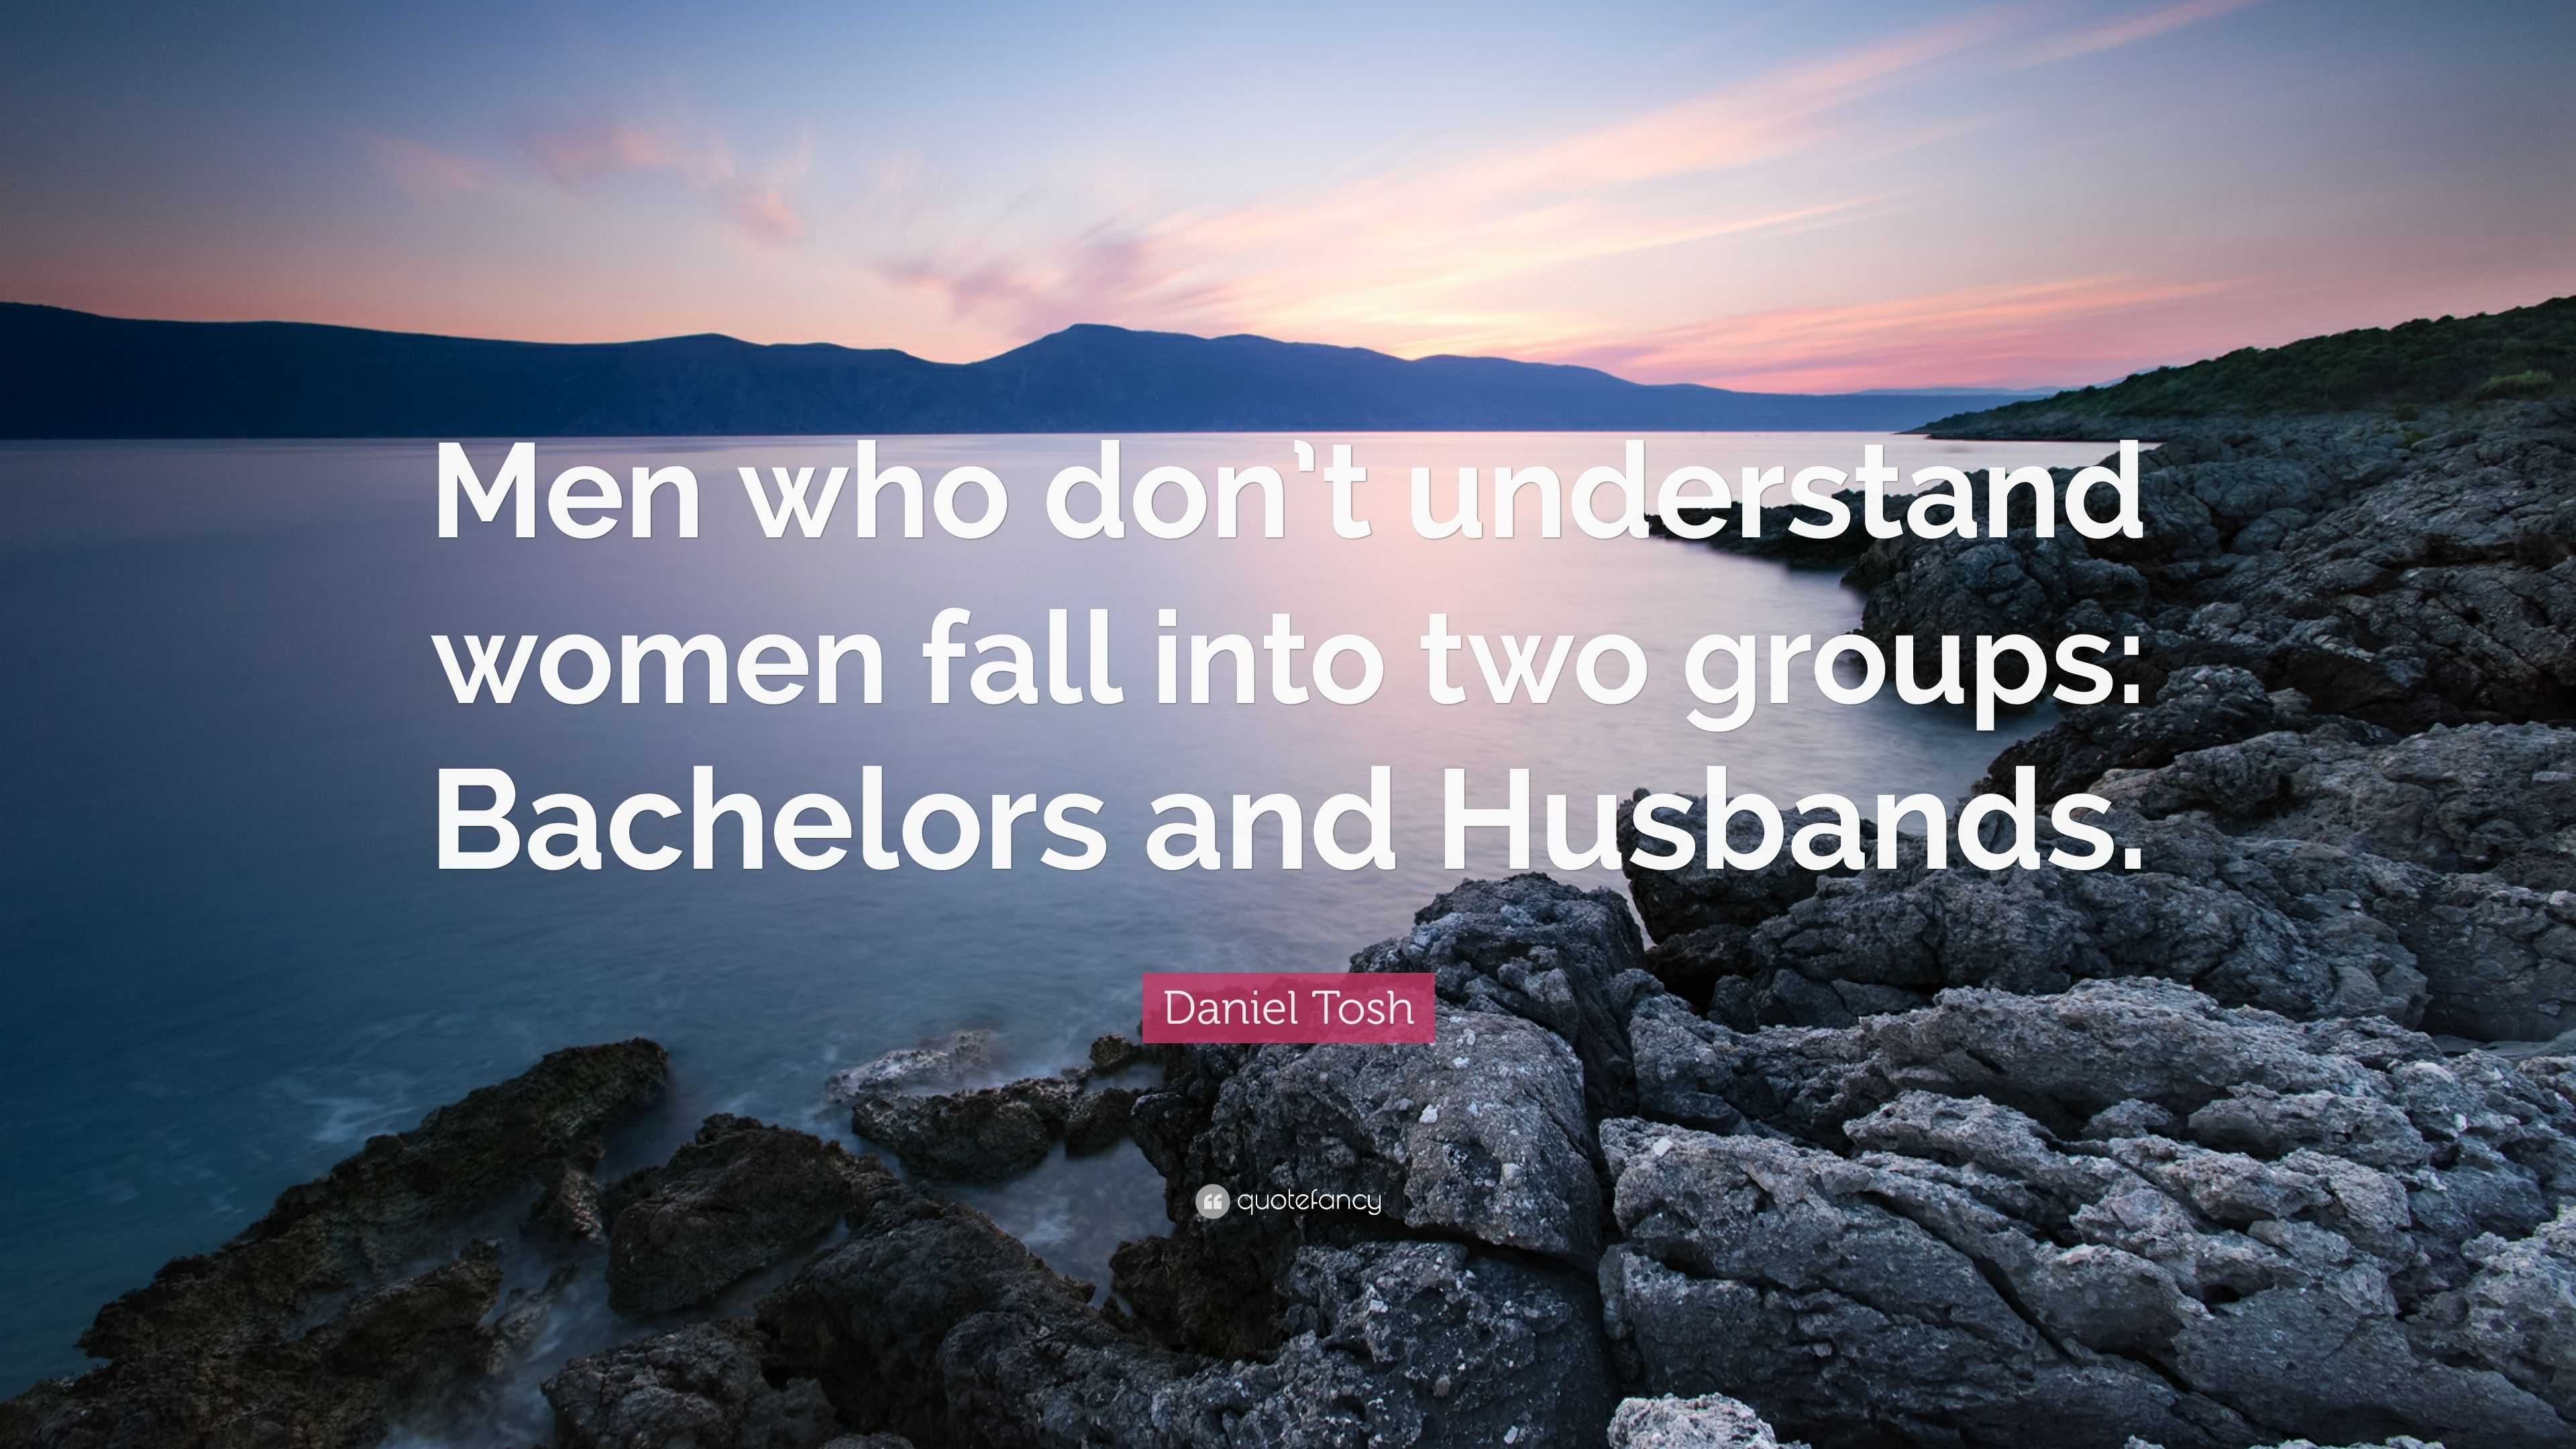 Daniel Tosh Quote: “Men who don’t understand women fall into two groups ...